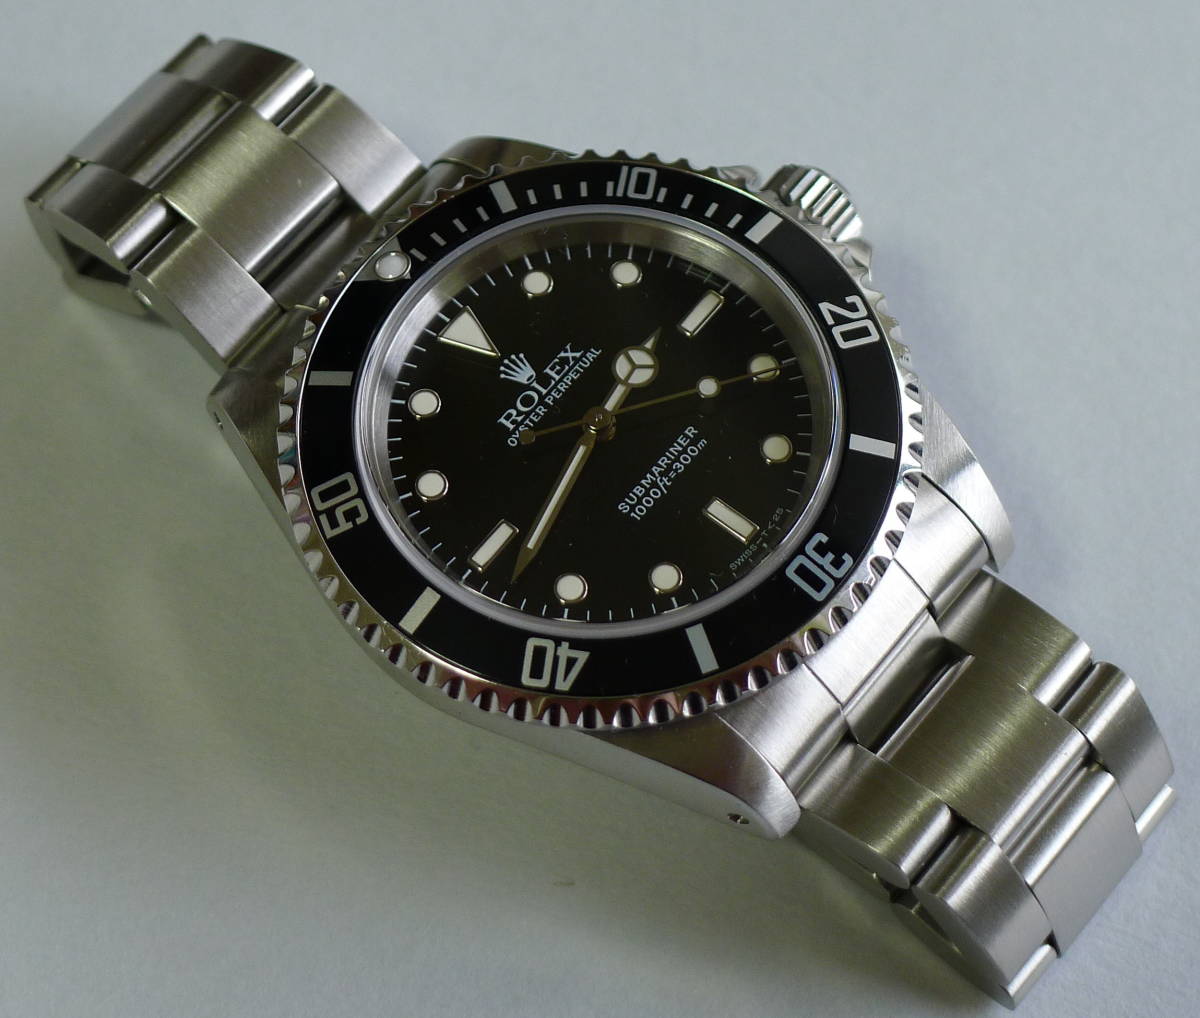  free shipping *ROLEX SUBMARINER / Rolex * Submarine 14060 U537*** self-winding watch men's wristwatch, Japan Rolex OH settled sa guarantee * inside out box attaching *